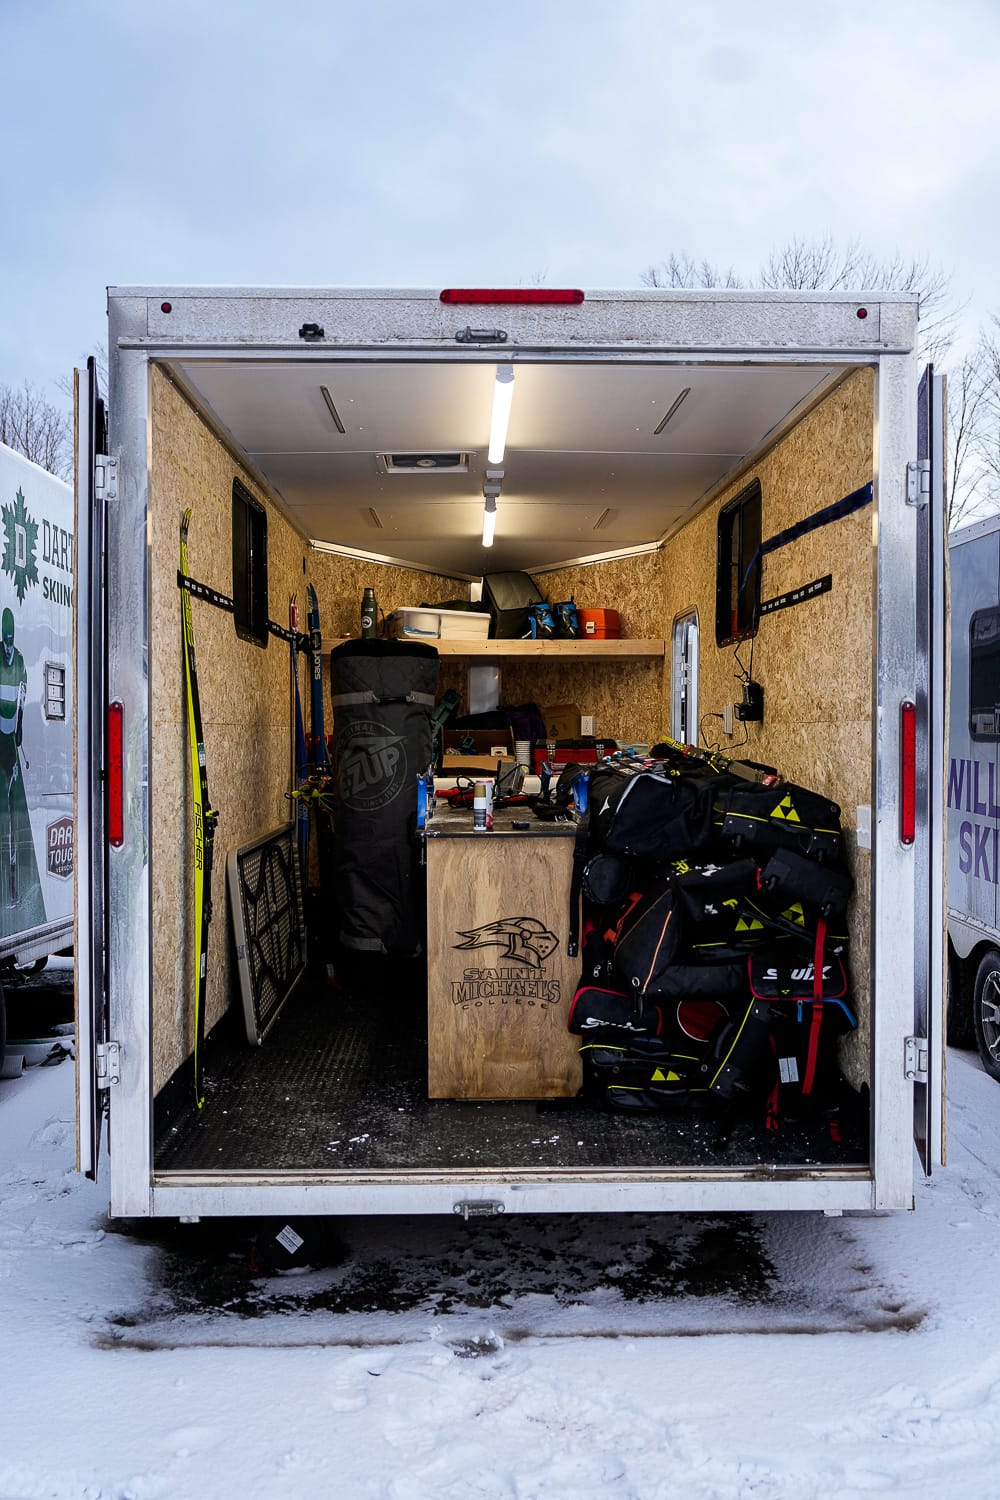 Inside the new Nordic trailer (photo by Steve Fuller at FlyingPoint Road)